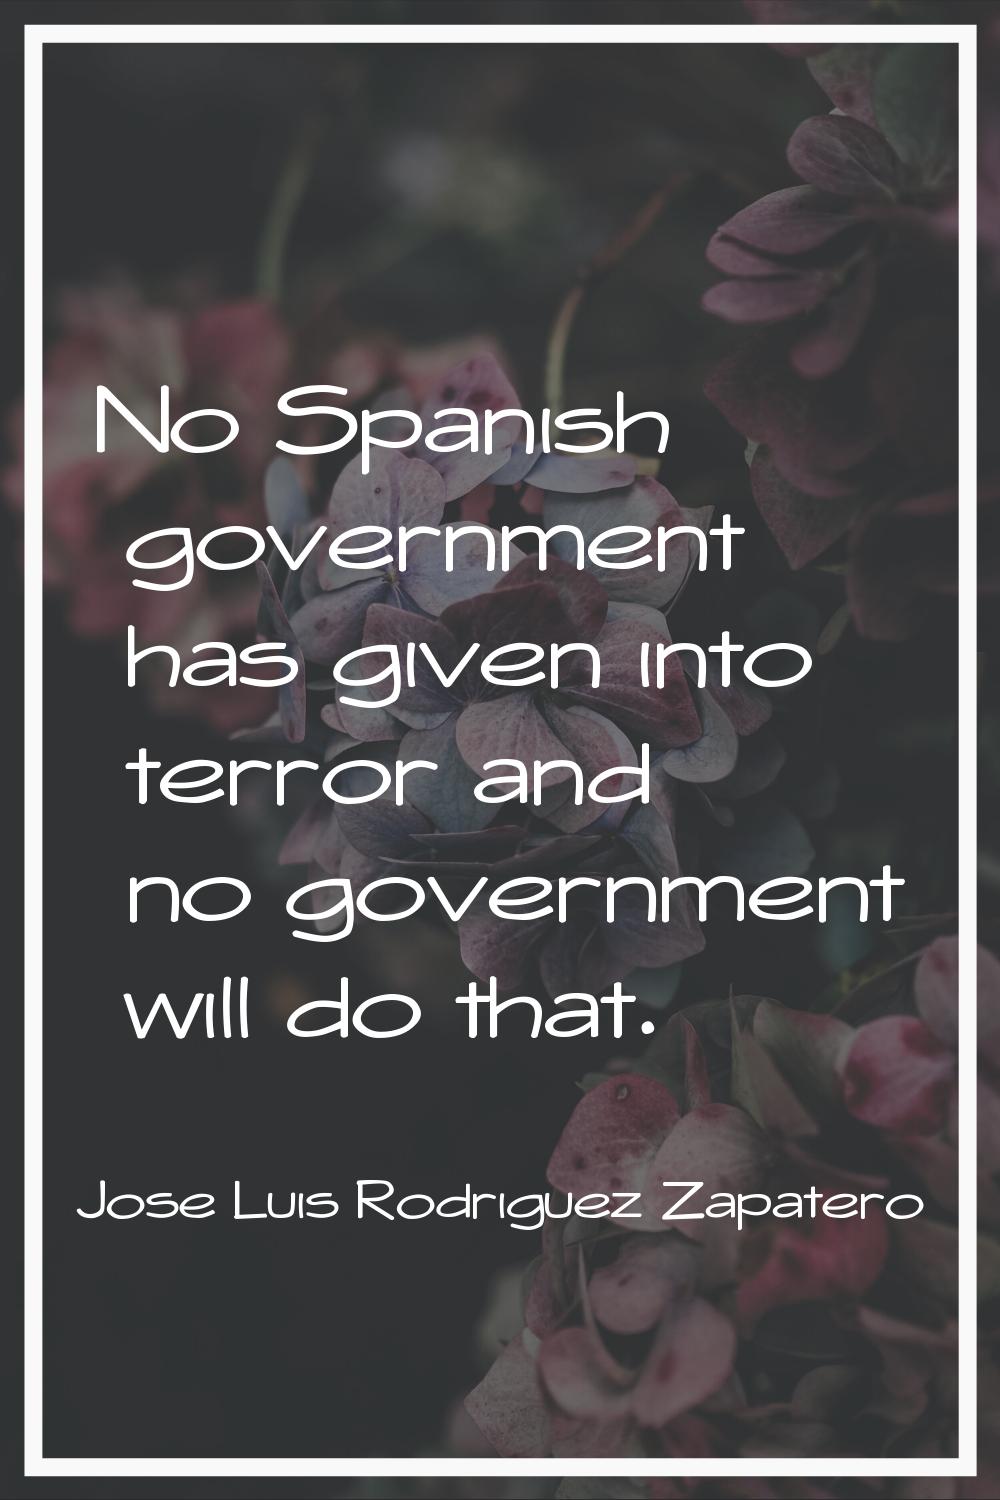 No Spanish government has given into terror and no government will do that.